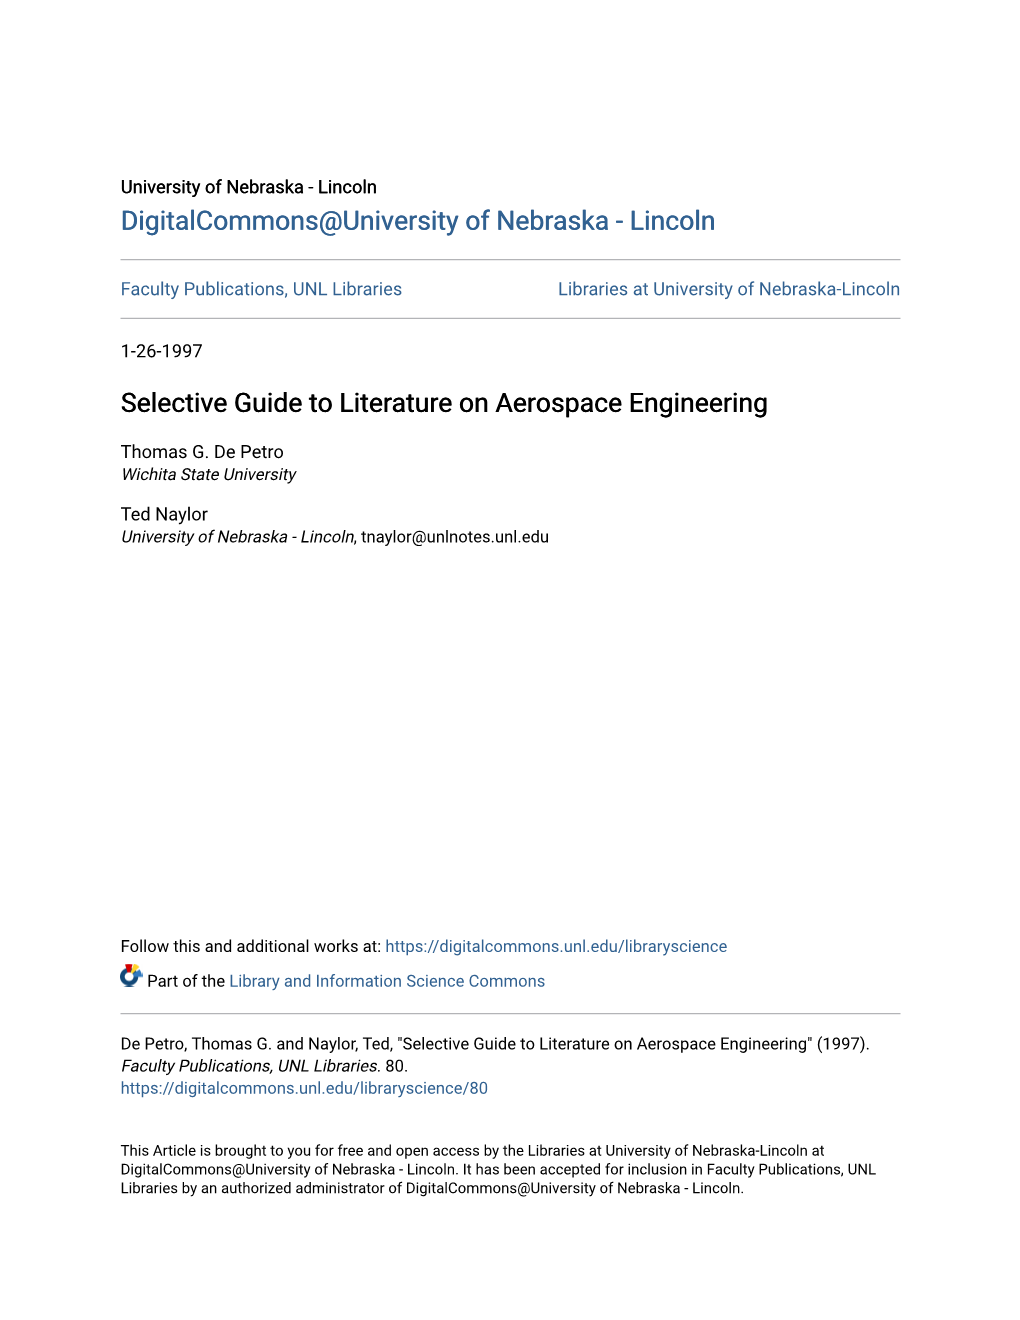 Selective Guide to Literature on Aerospace Engineering